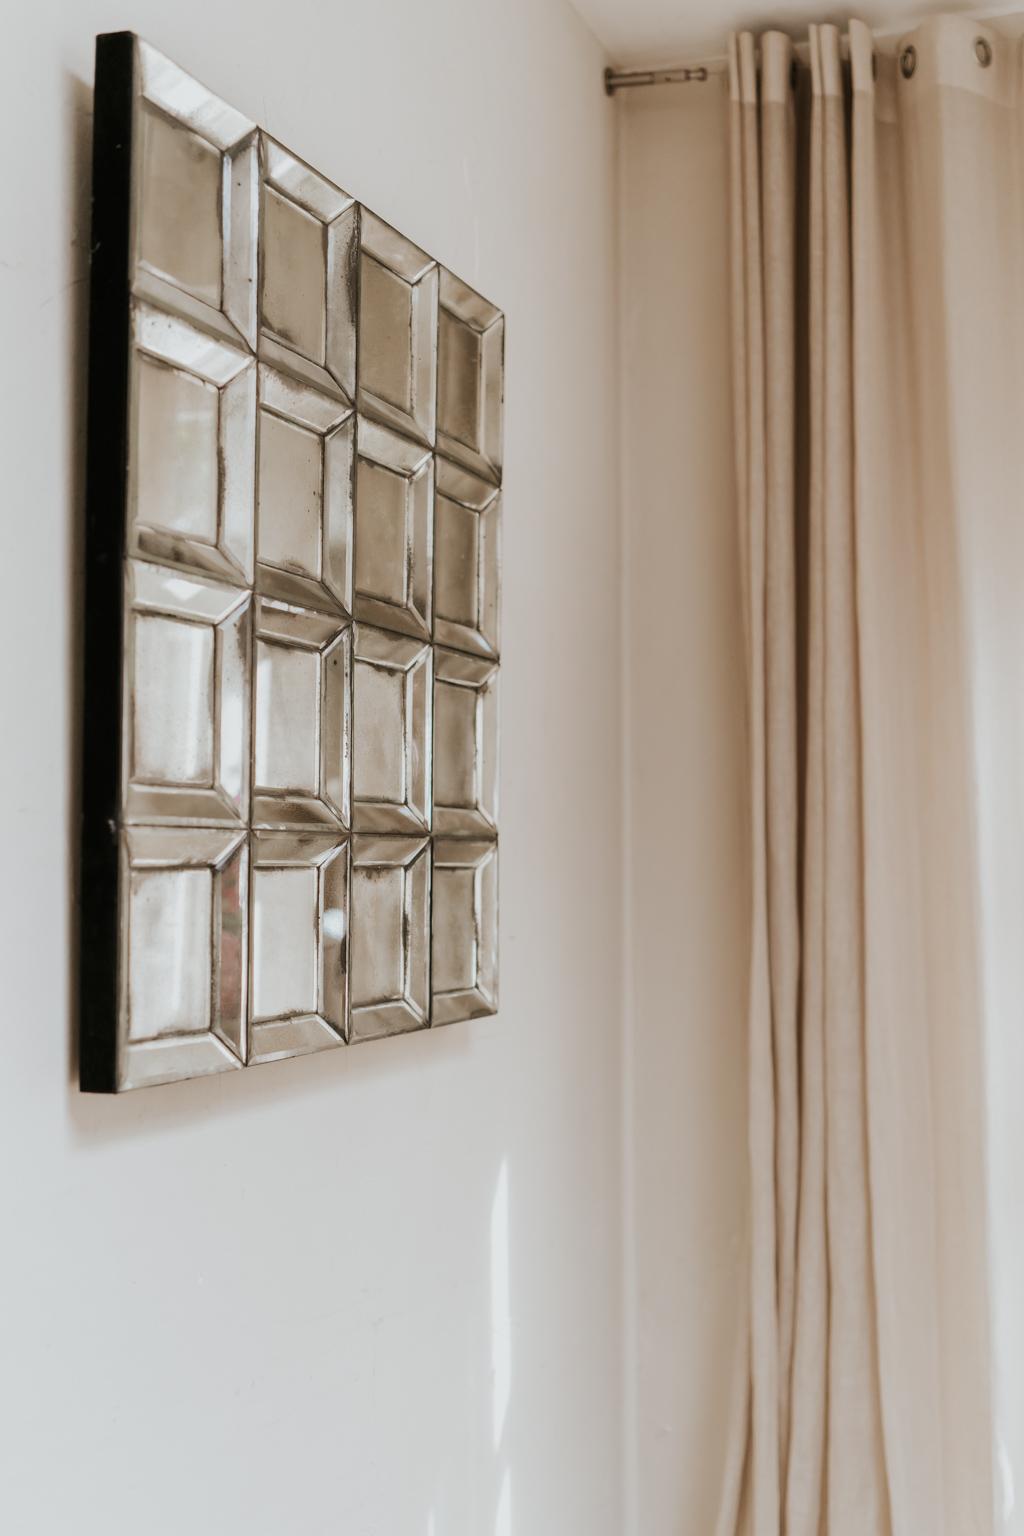 This mirror comes from a Spanish hotel, these were made in the 1980s, perfect for every interior, modern or Classic.